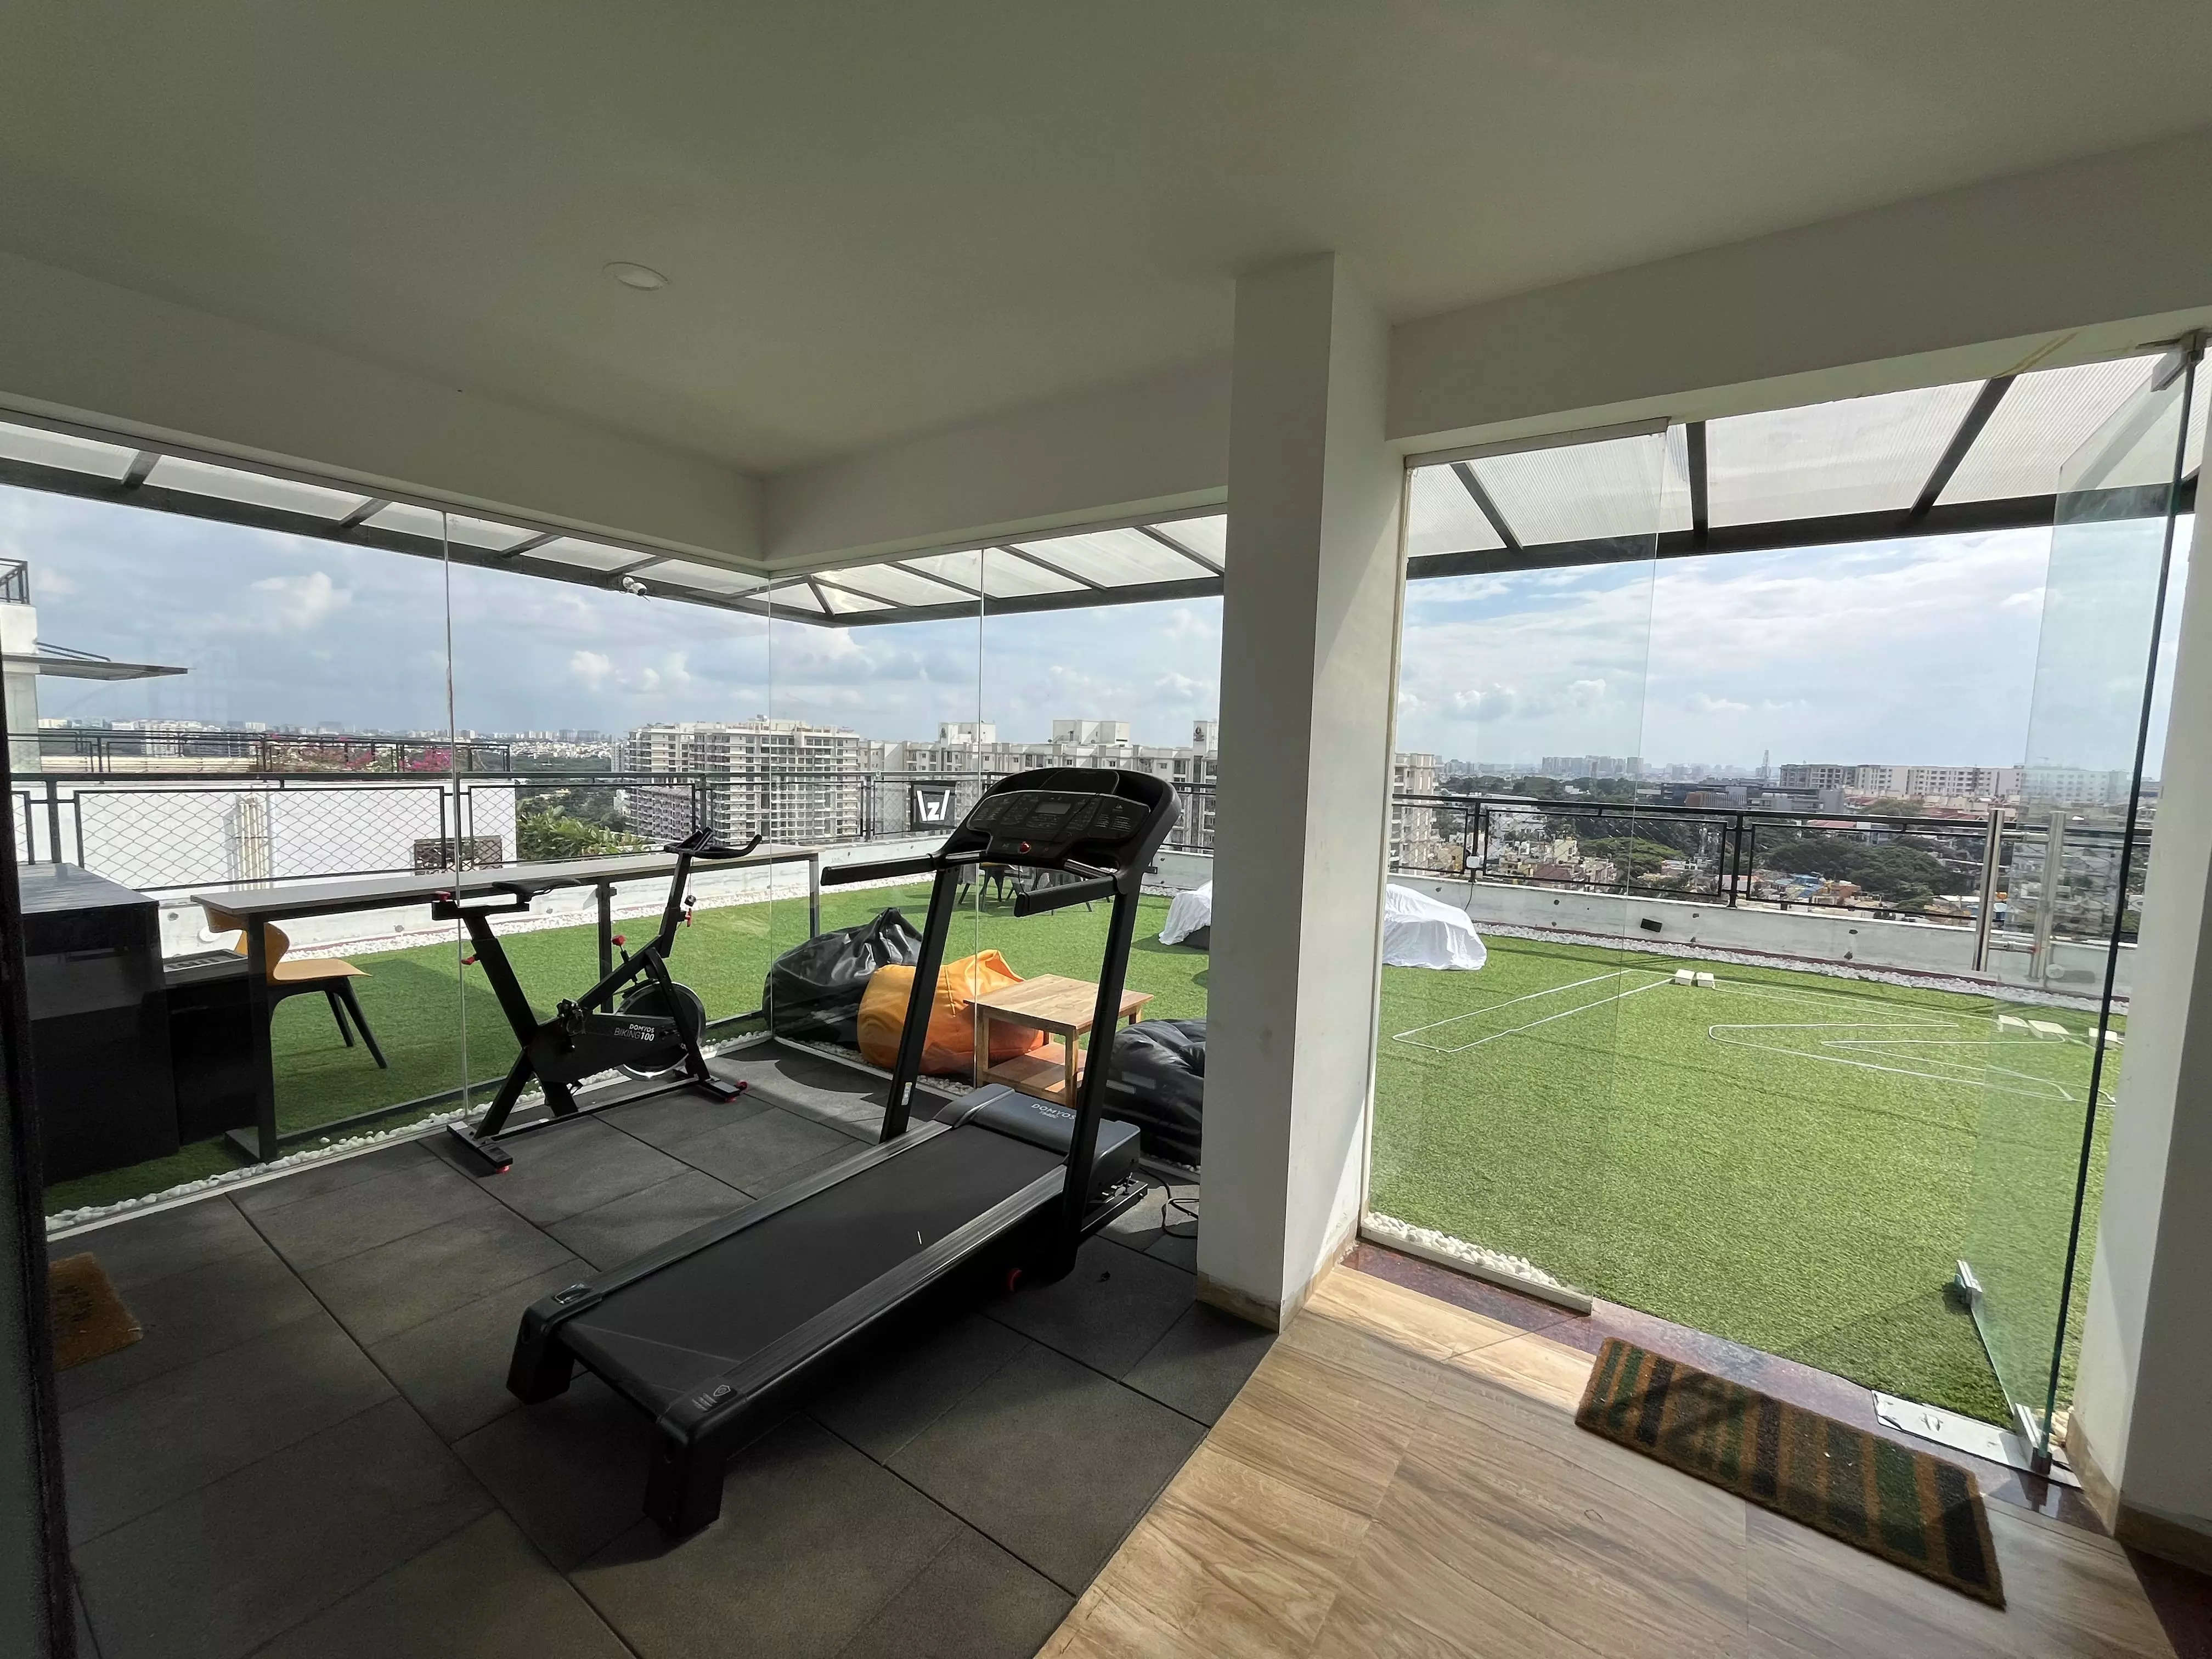 <p>A gym overlooking the terrace at the Zo House</p>